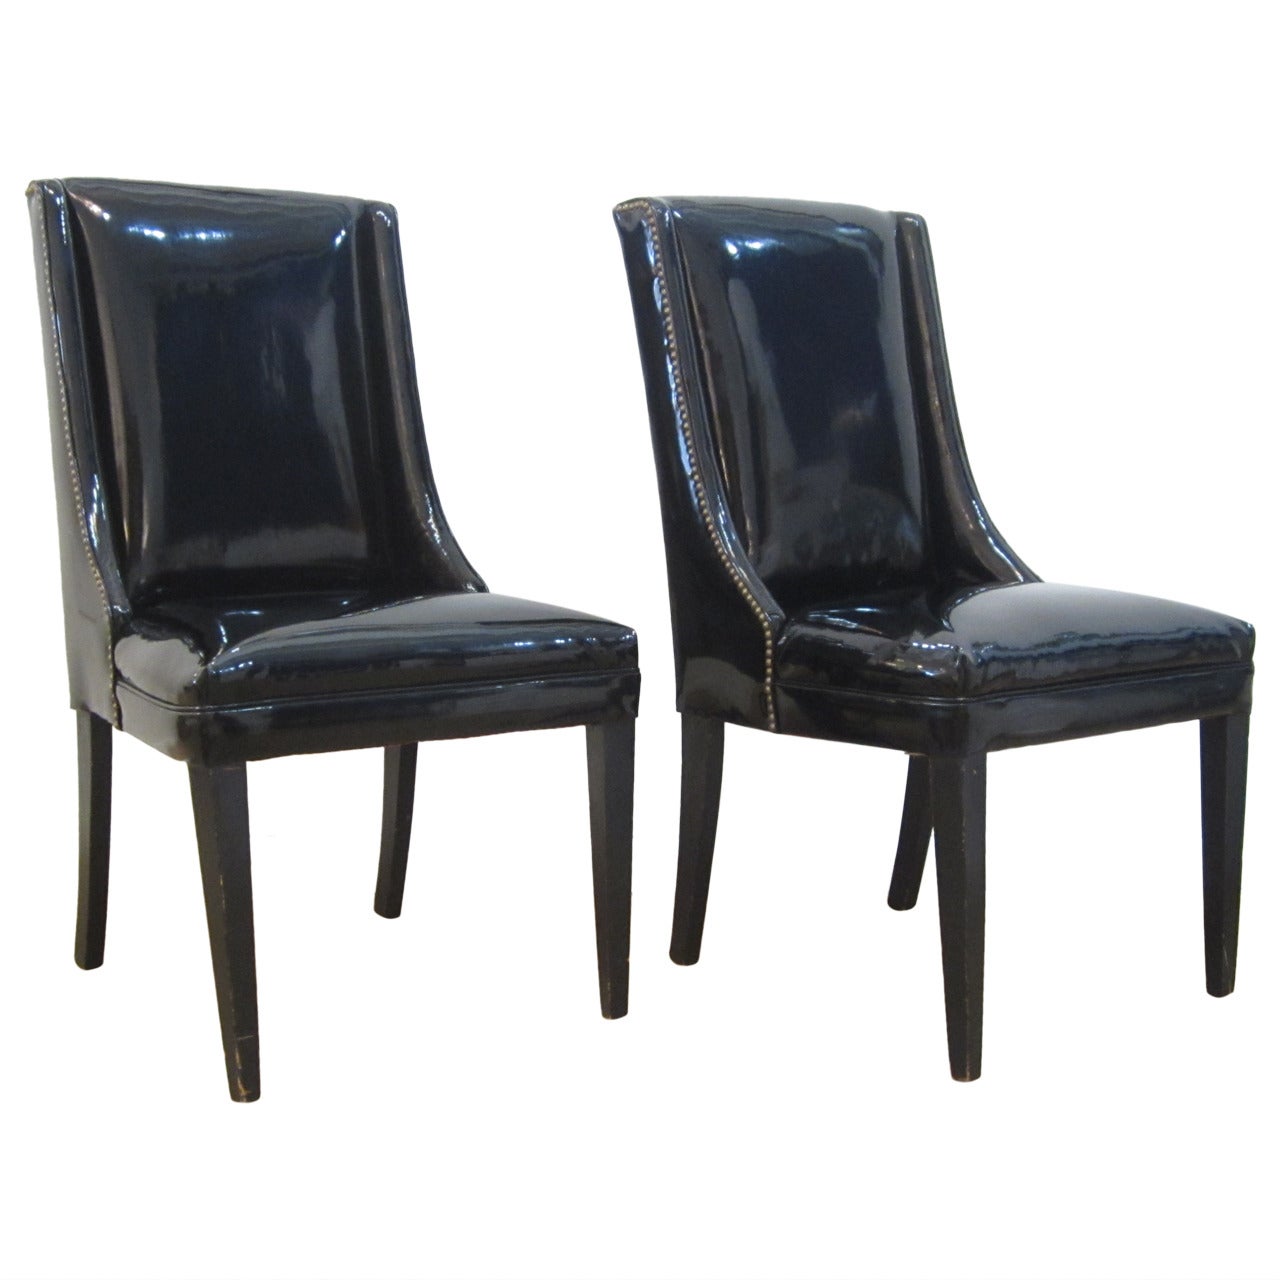 Pair of Midcentury Side Chairs in Faux Leather with Brass Tacks For Sale